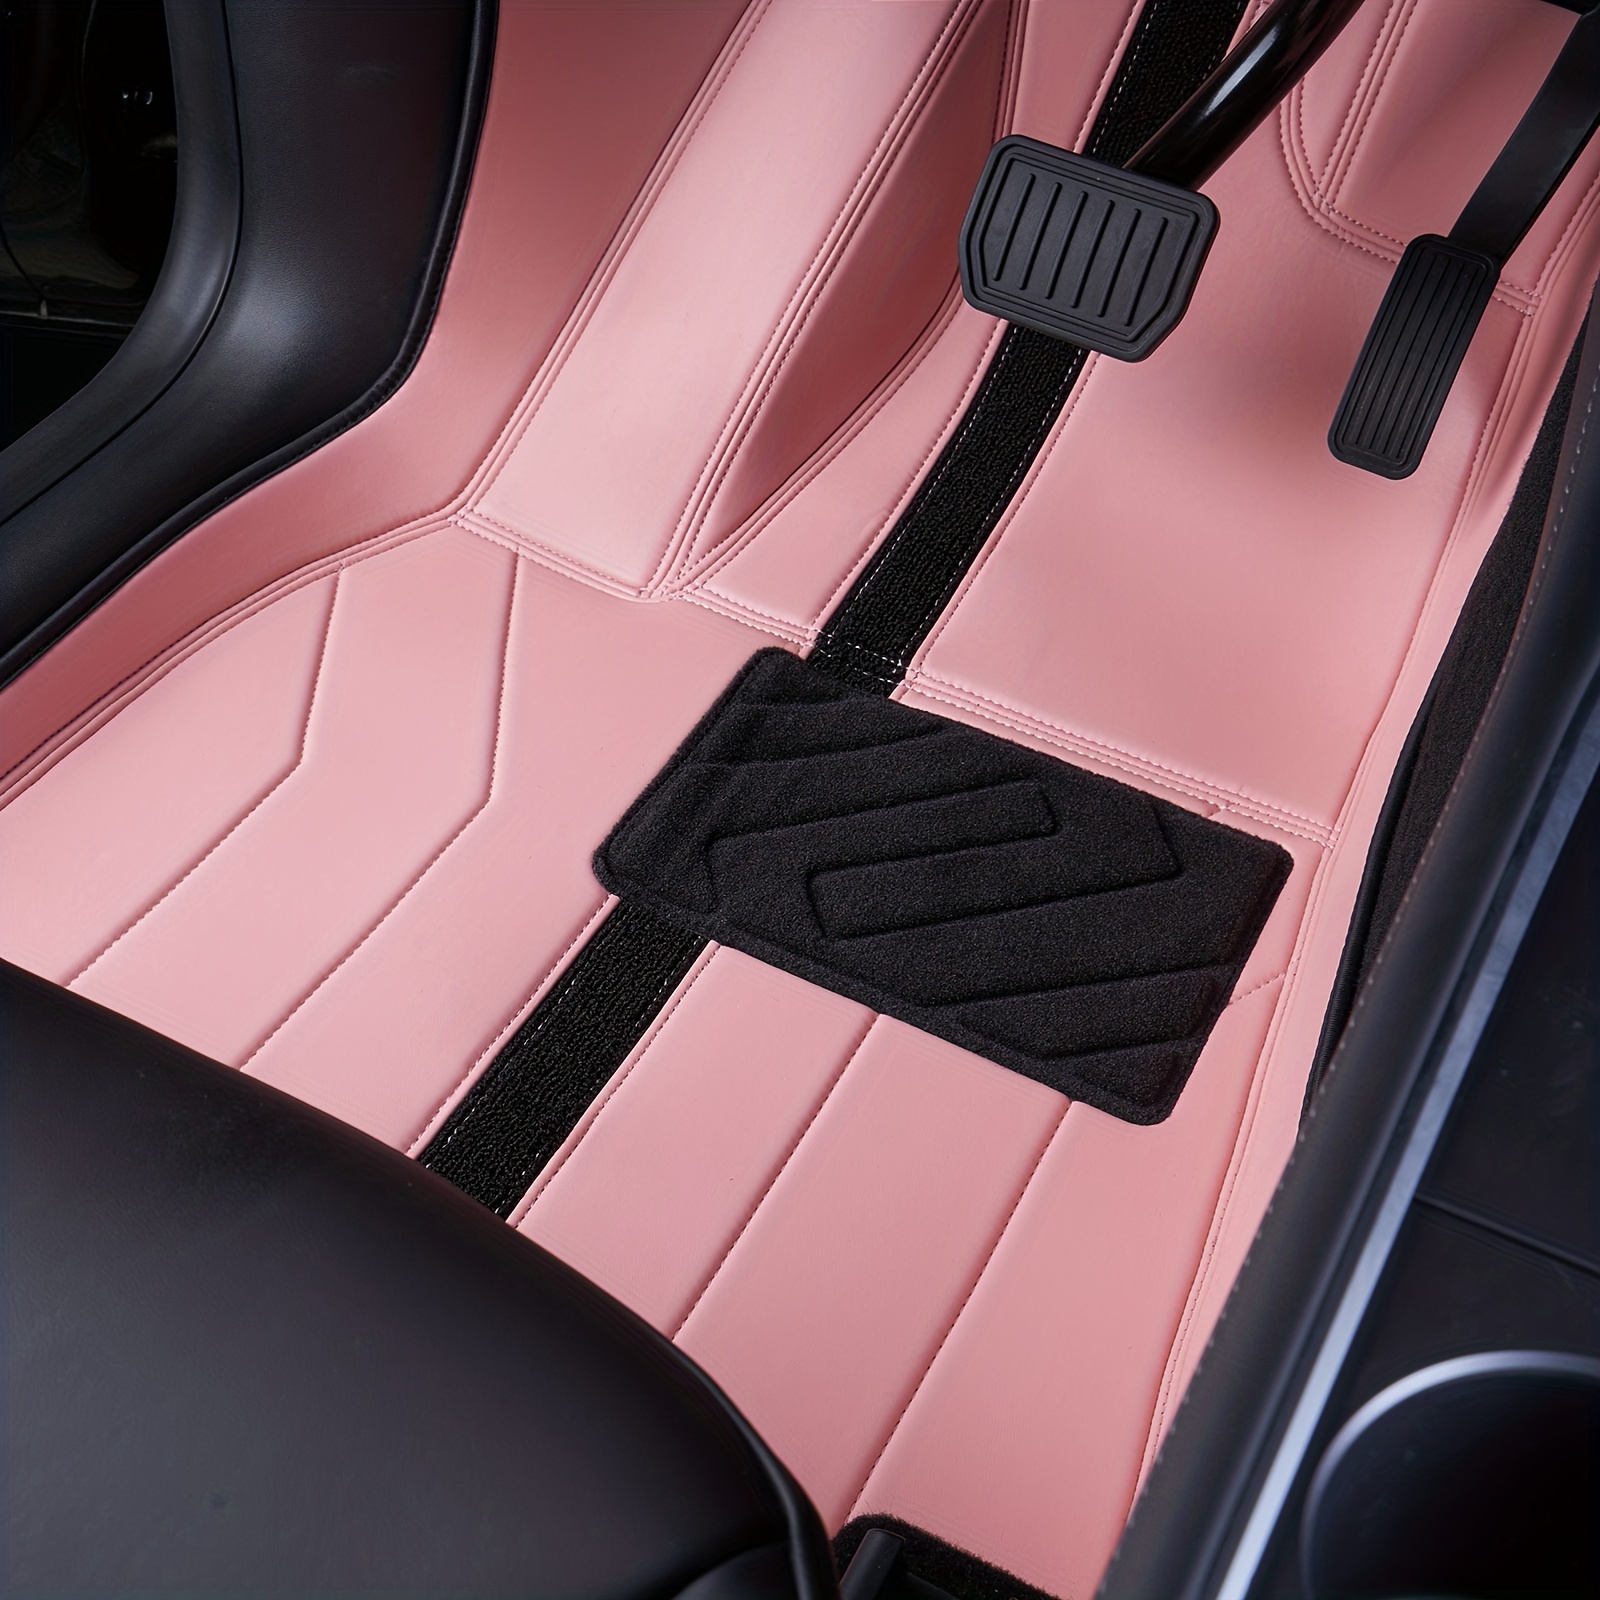 Here's How To Clean Your Car Floor Mats